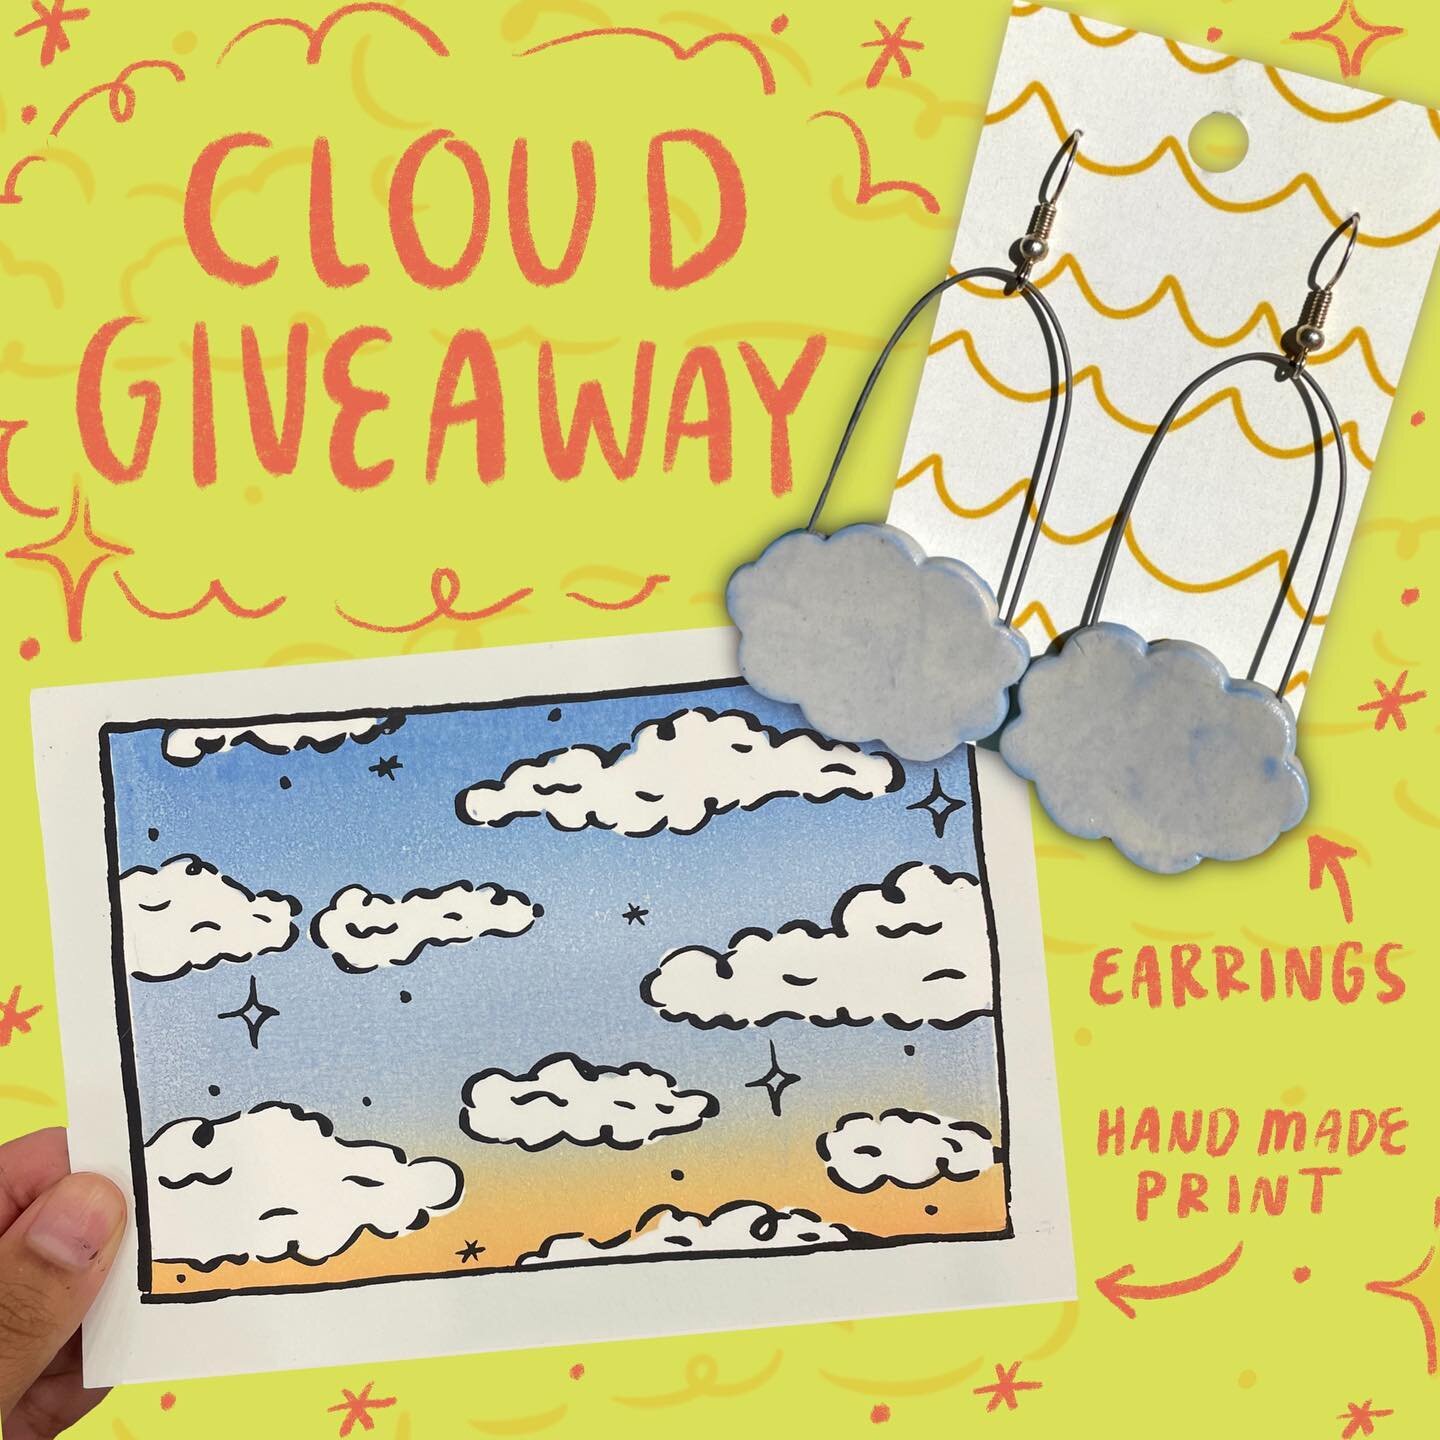 ☁️☁️CLOUD GIVEAWAY!!!☁️☁️
I&rsquo;ve hit a couple milestones that I wanna celebrate with you all by giving away a fresh-off-the-press relief + screen print and ceramic cloud earrings!! Over $60 value! ☁️
~
How to enter:
1. Like this post &amp; follow